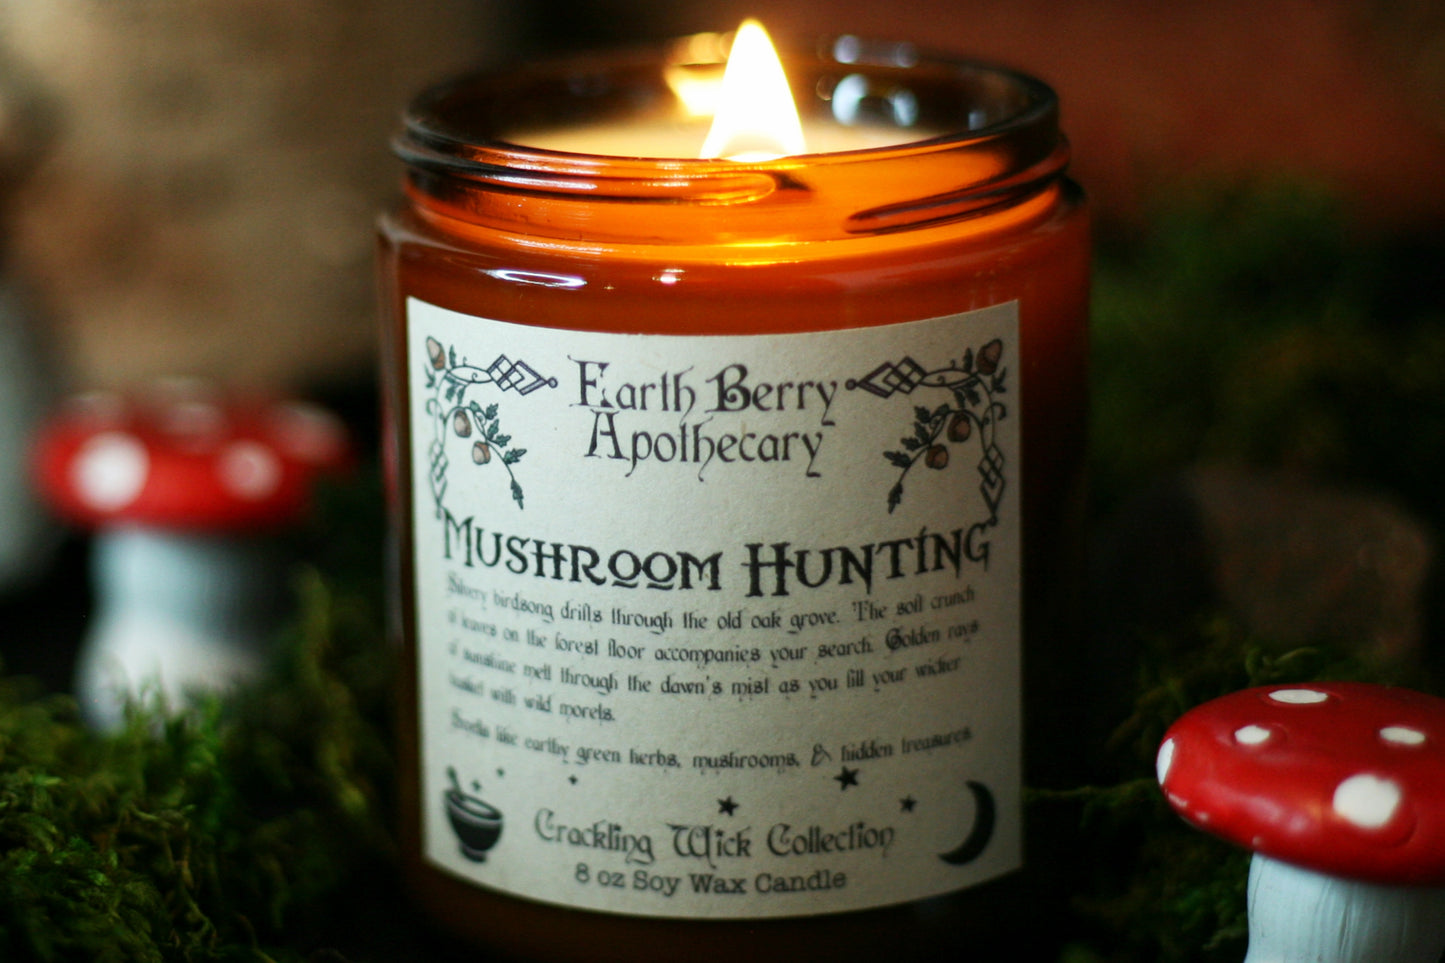 Mushroom hunting patchouli sandalwood scented crackling wood wick soy candle